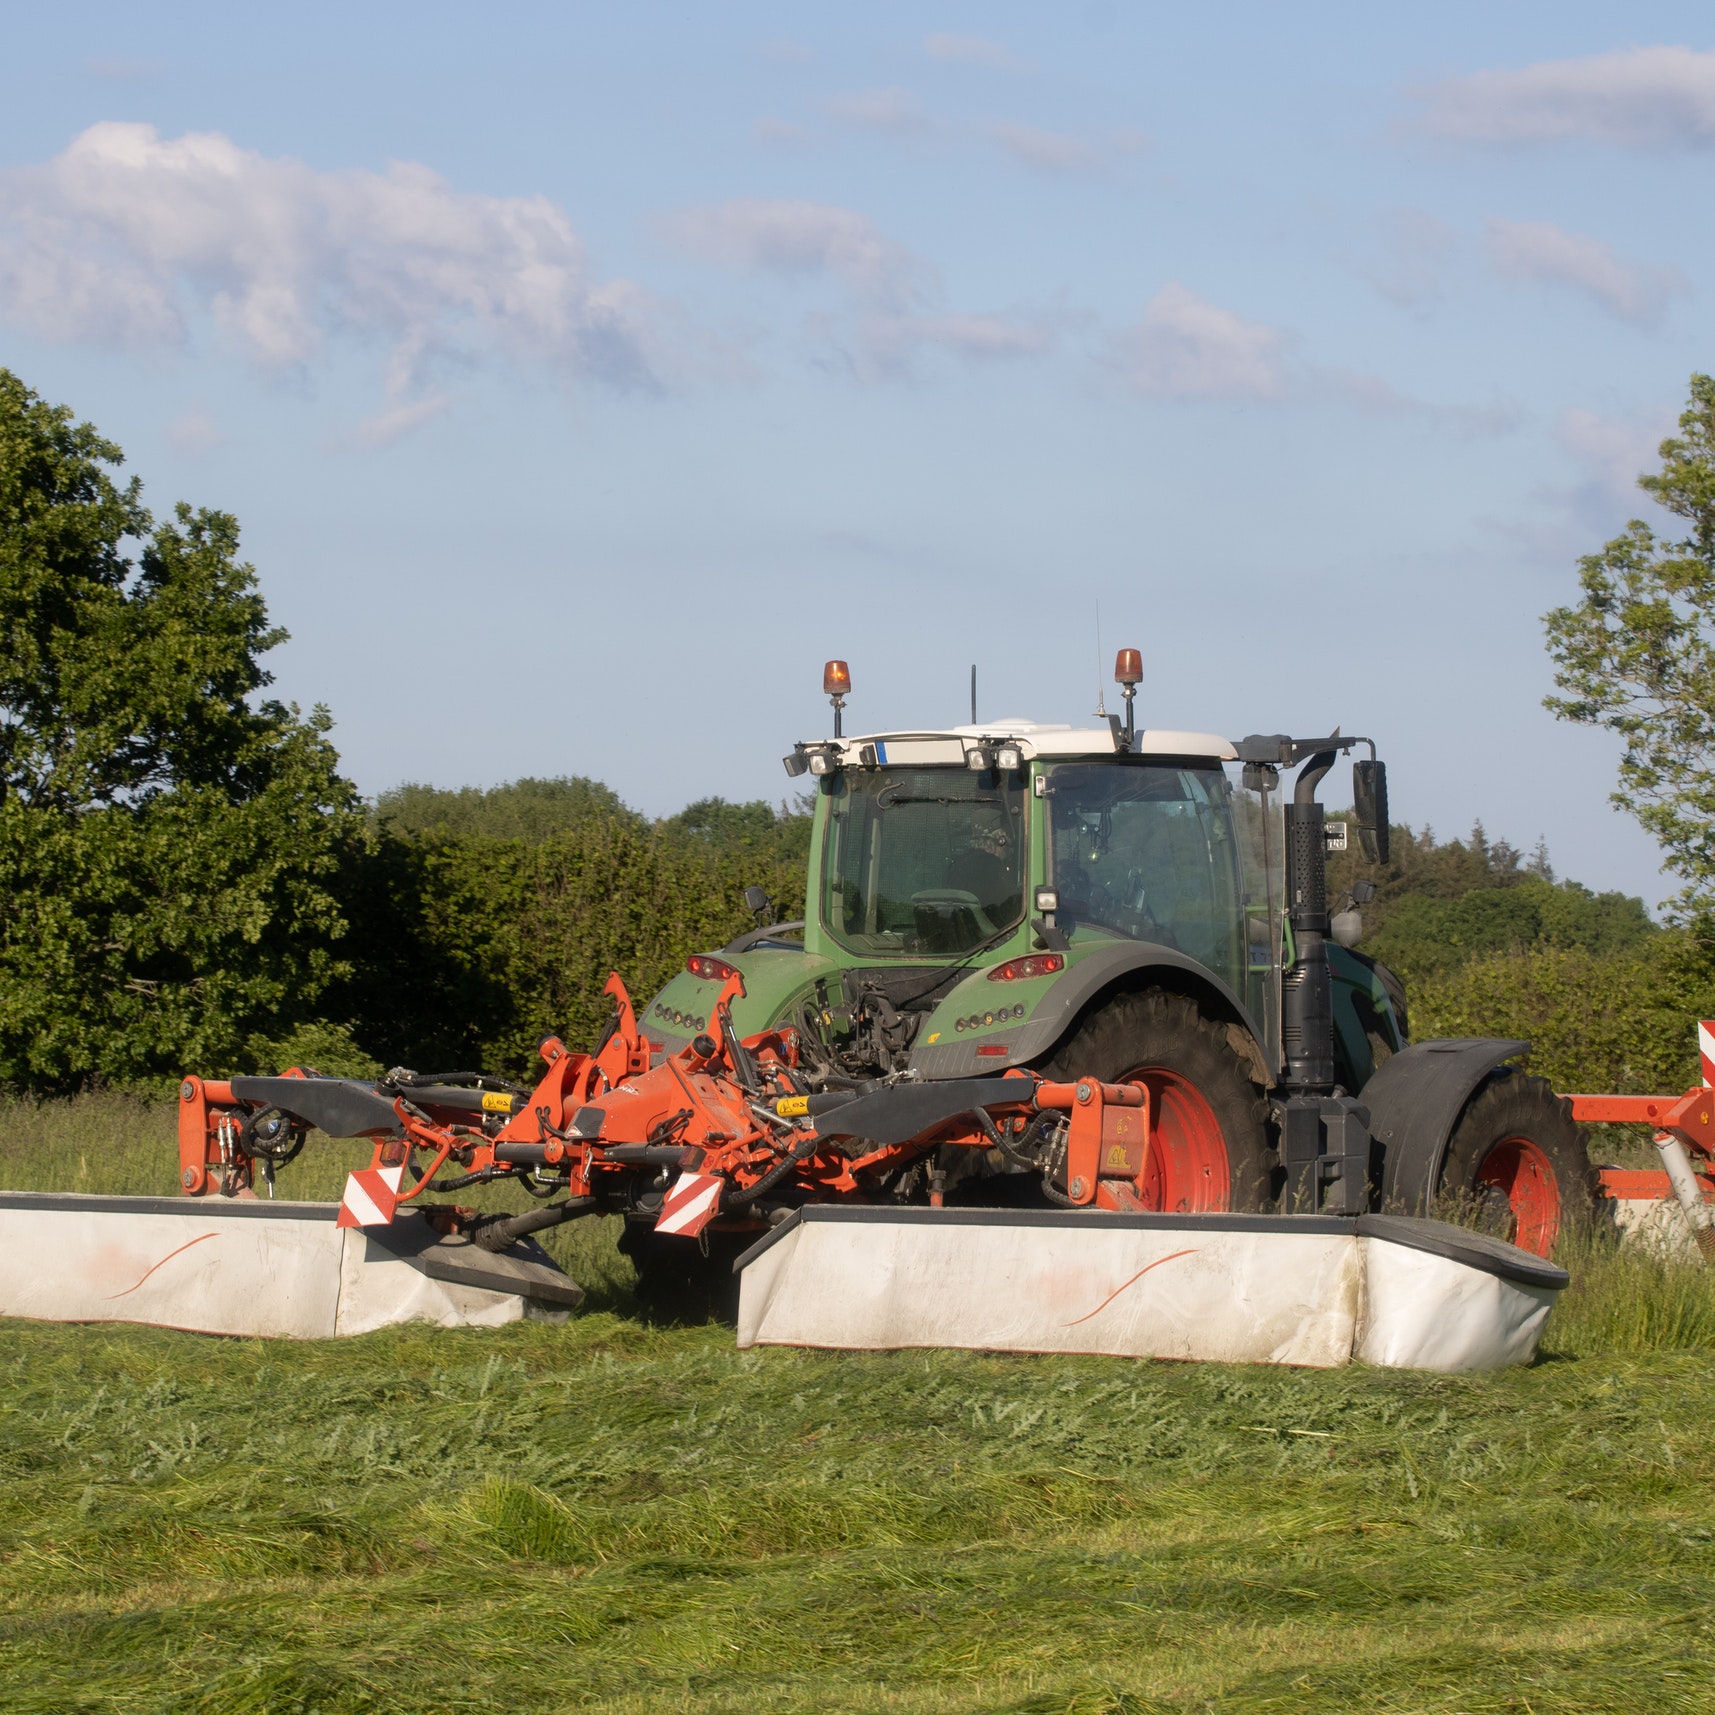 A tractor and equipment in a field